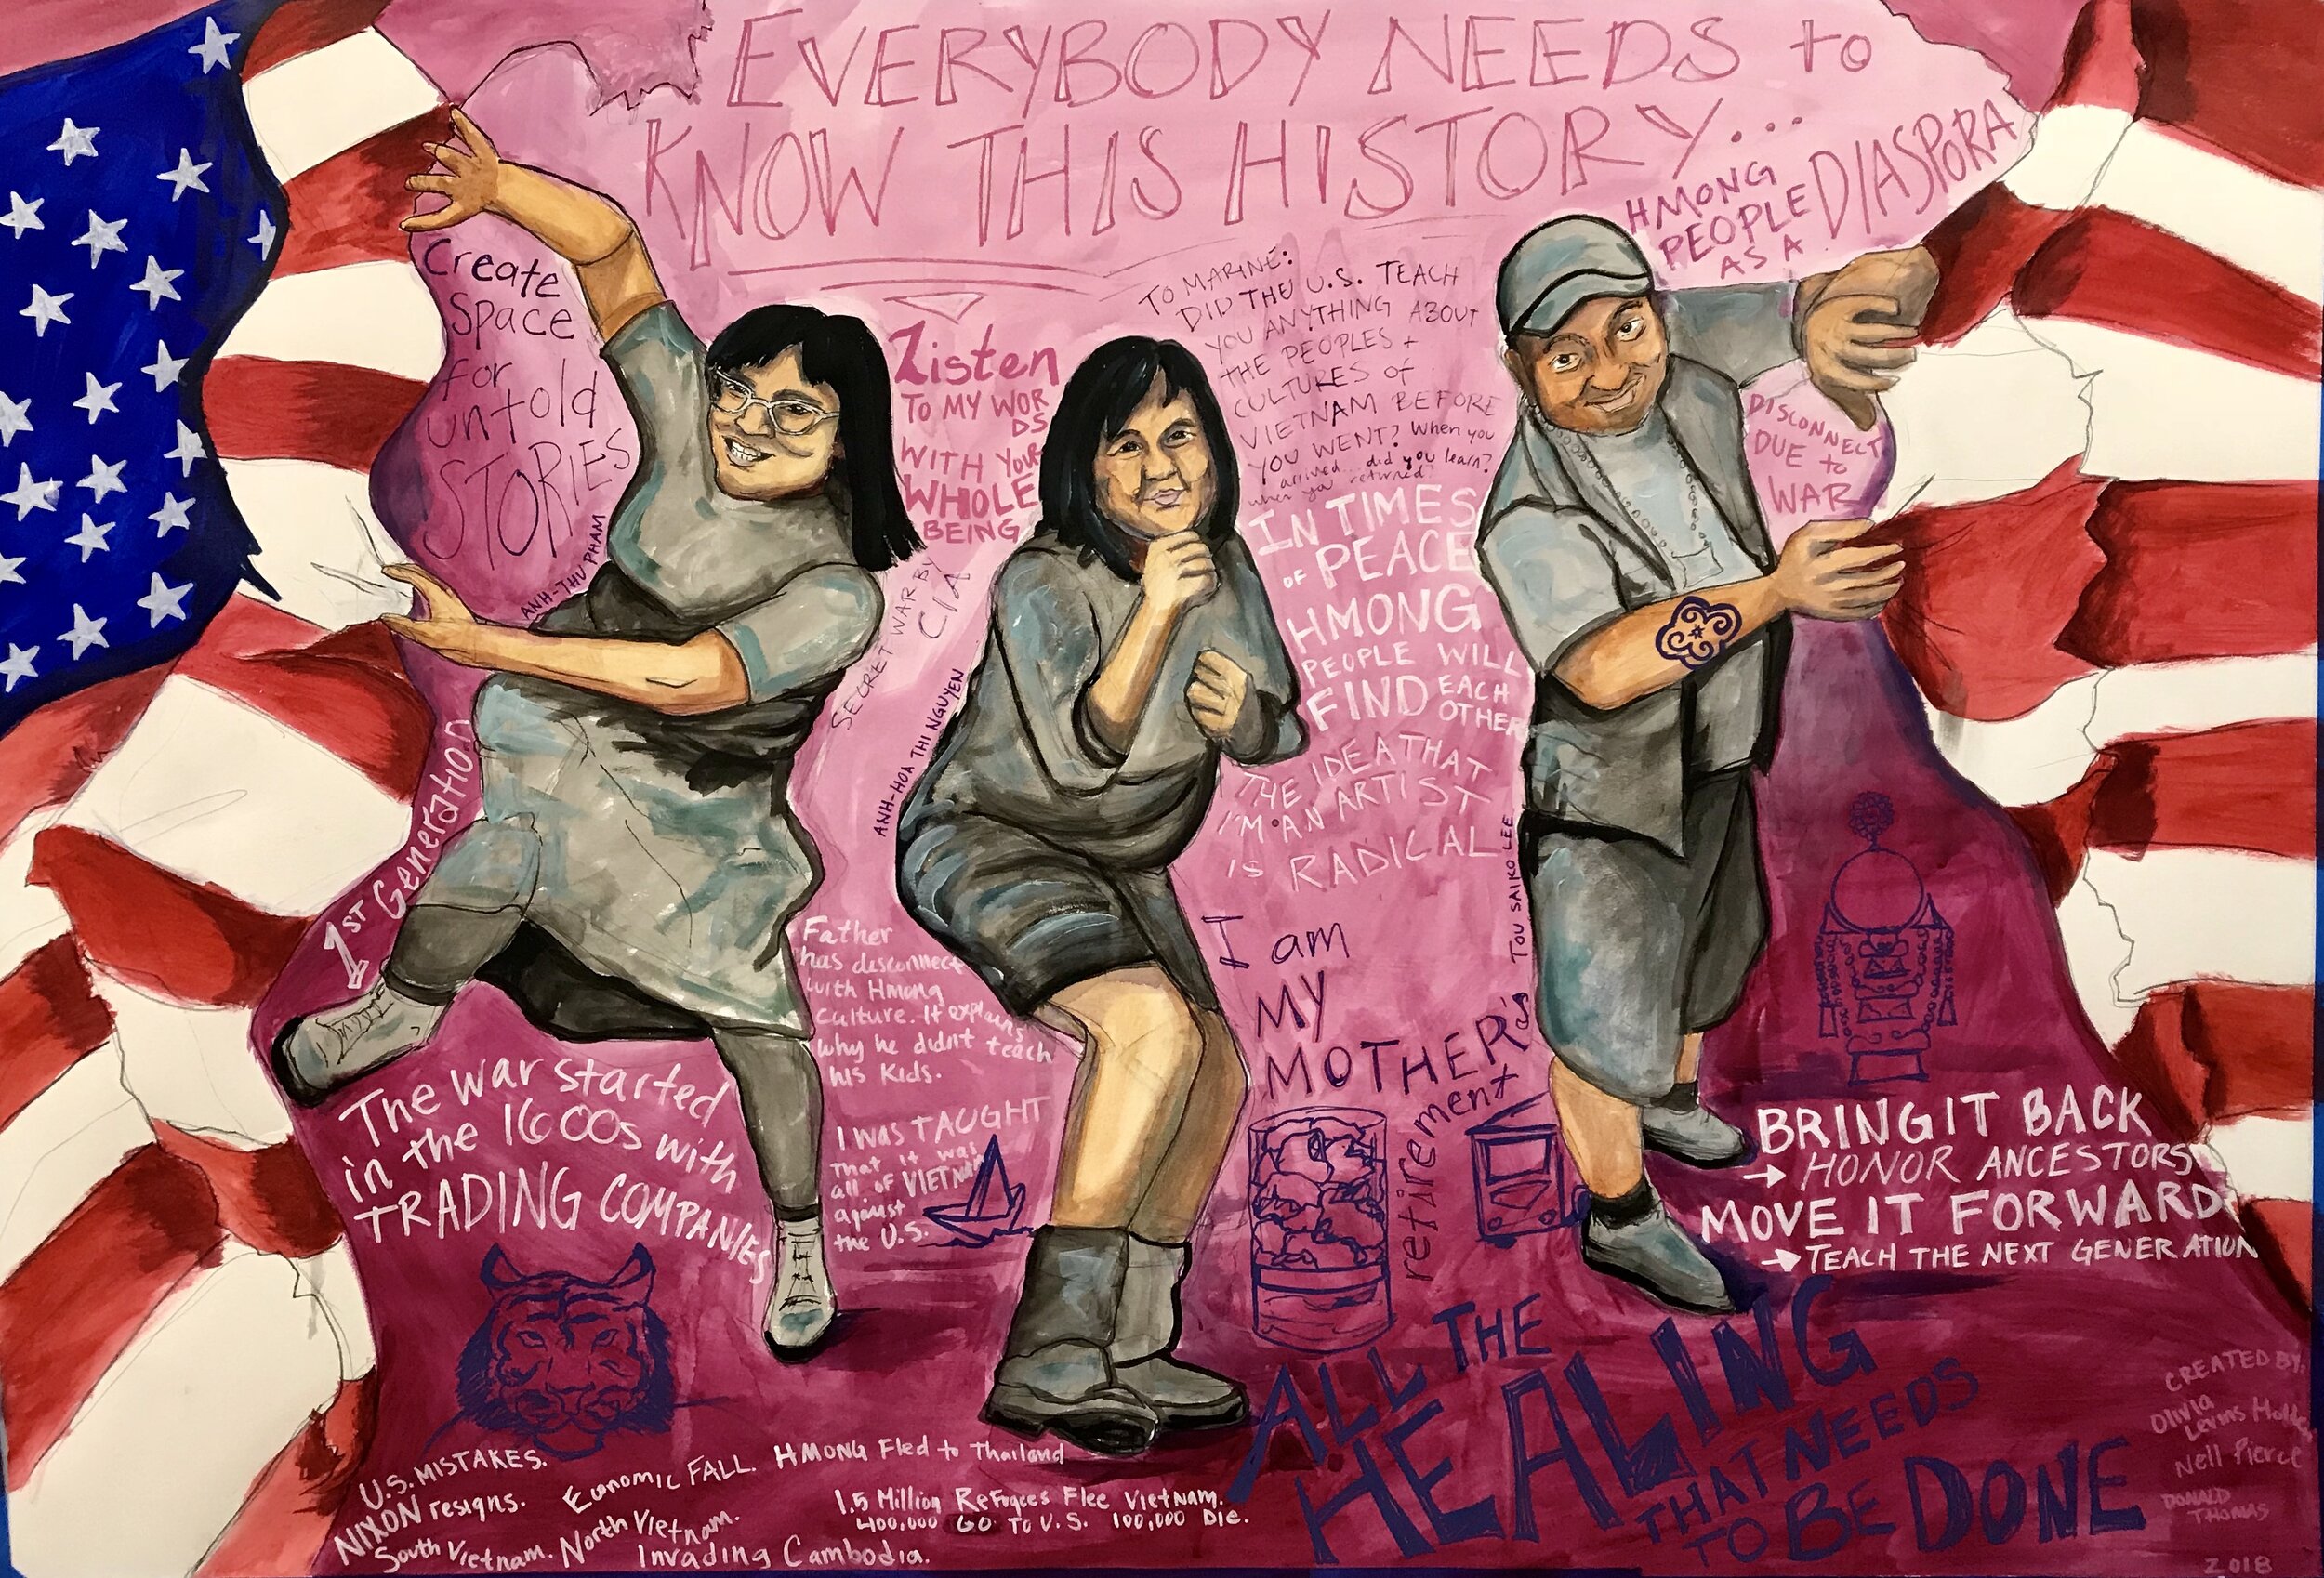  1/3 Graphic Recordings for the series “Vietnam War Dialogues: Veterans, Antiwar Activists, and Refugees explore the intersections between then and now,” organized by Ahn-Thu Pham and Karin Aguilar San Juan at Macalester College, St. Paul, MN (2018) 